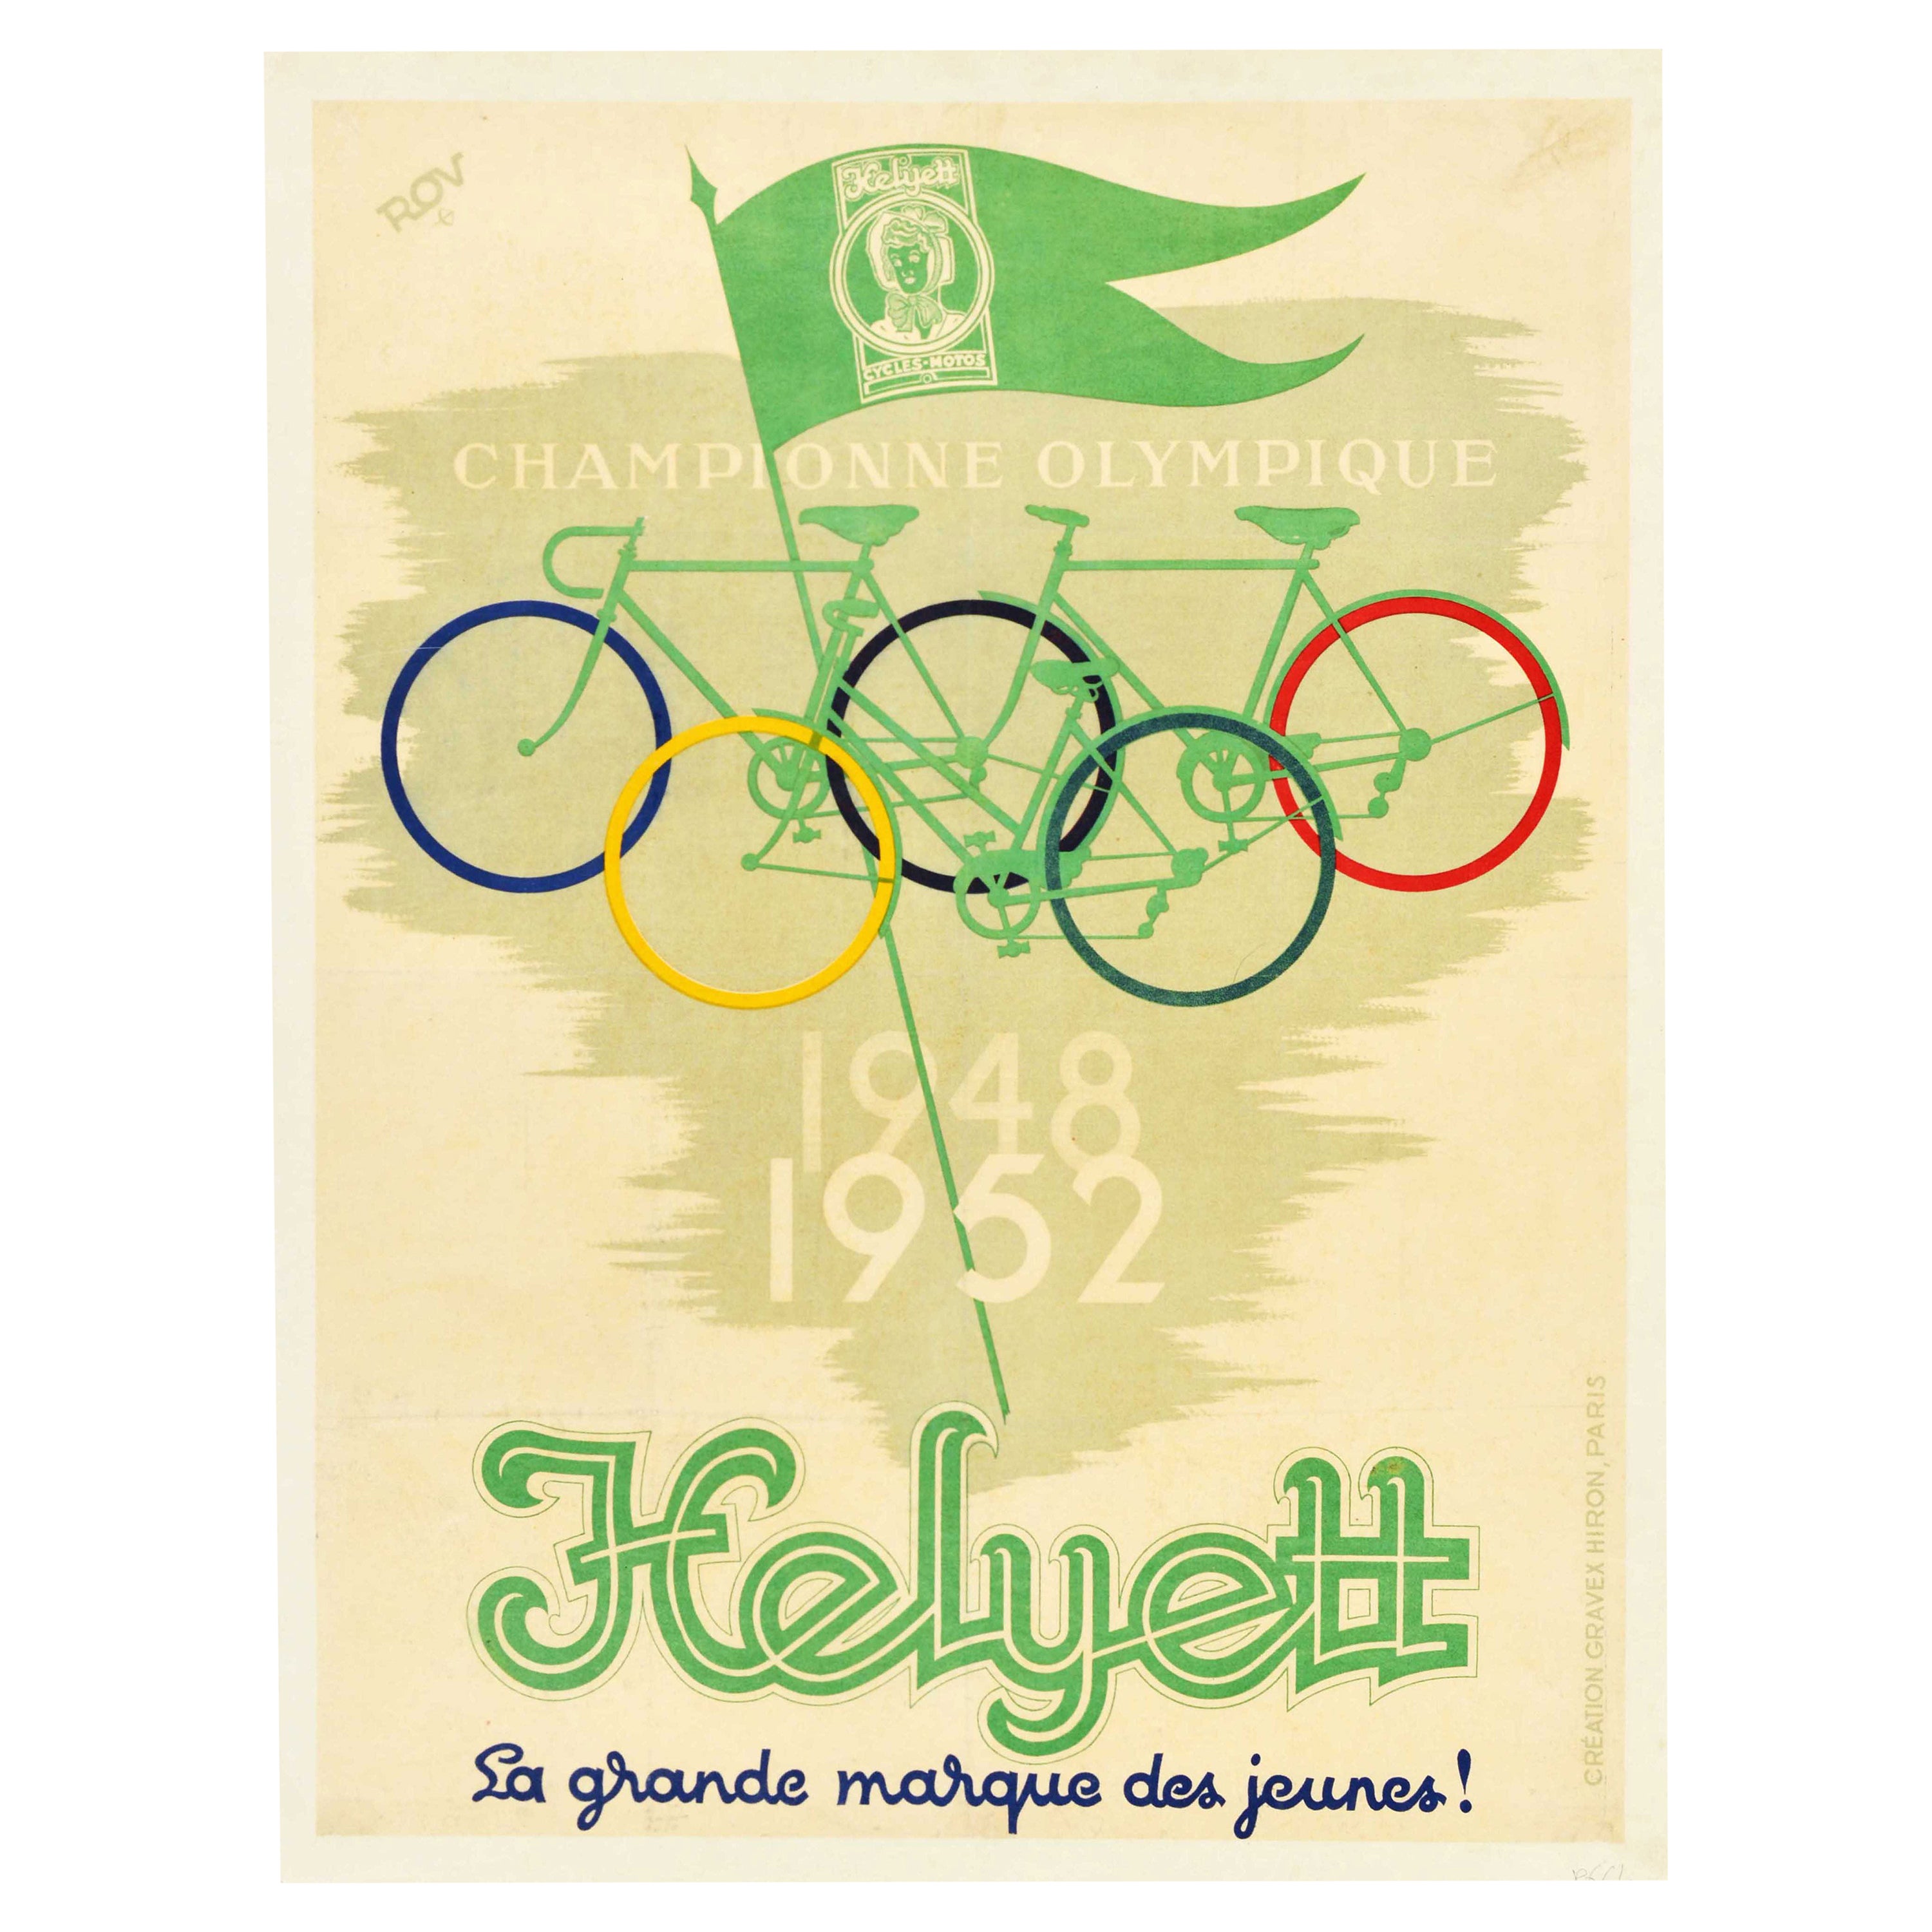 Original Vintage Poster Cycles Helyett Olympic Champion Bicycle Advertising Art